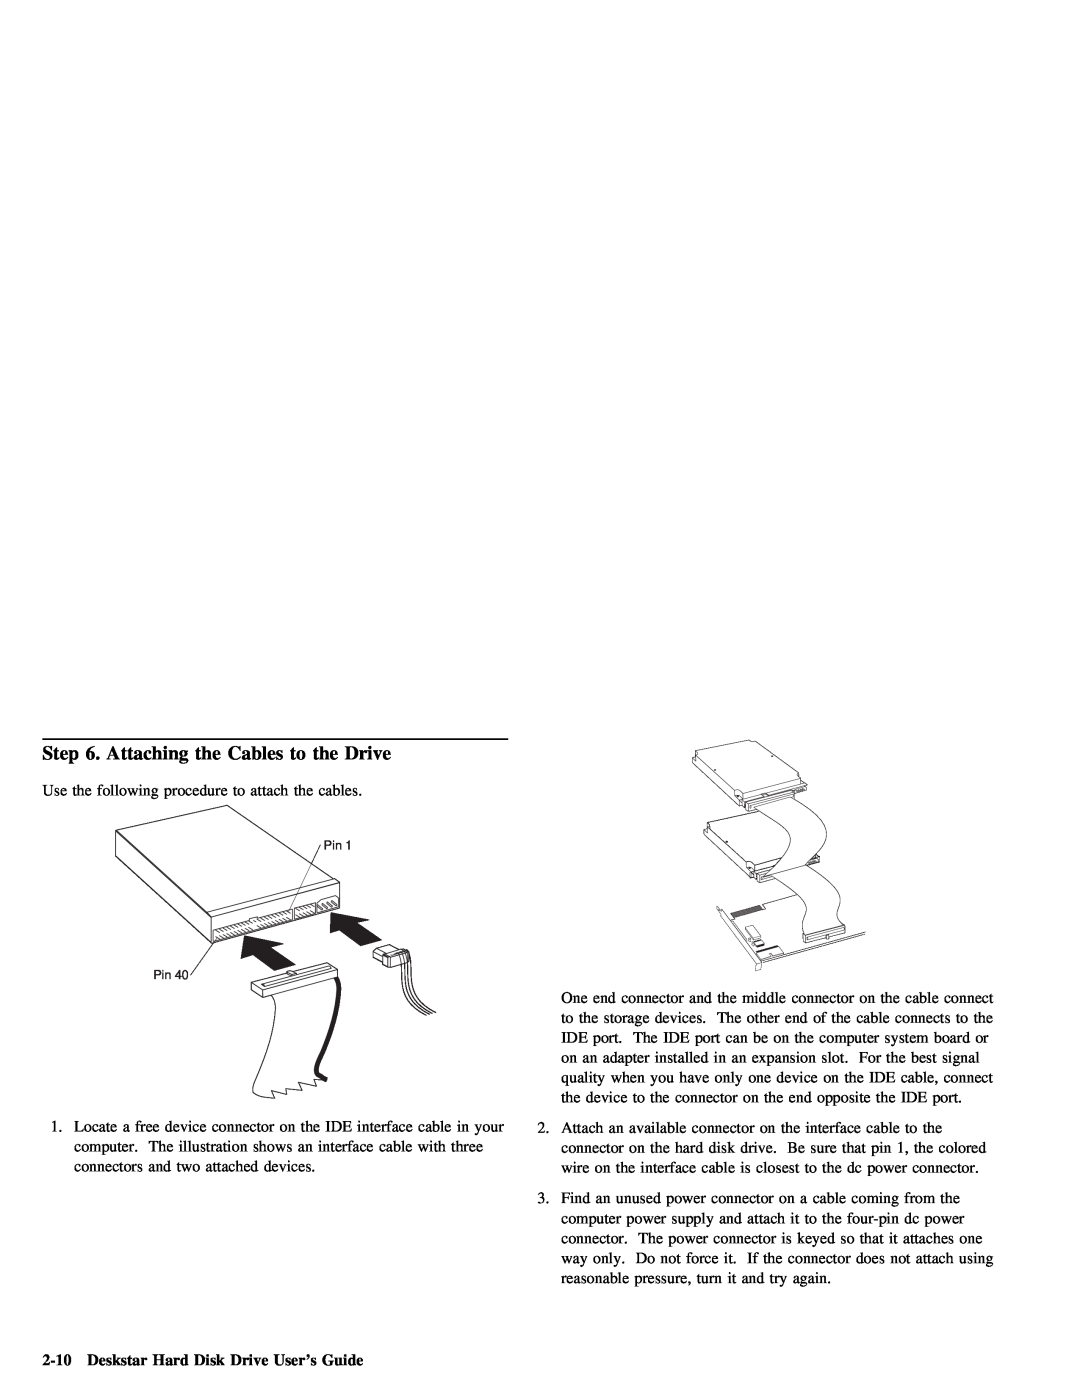 IBM ATA-3 manual Attaching the Cables to the Drive, Deskstar Hard Disk Drive User’s Guide 